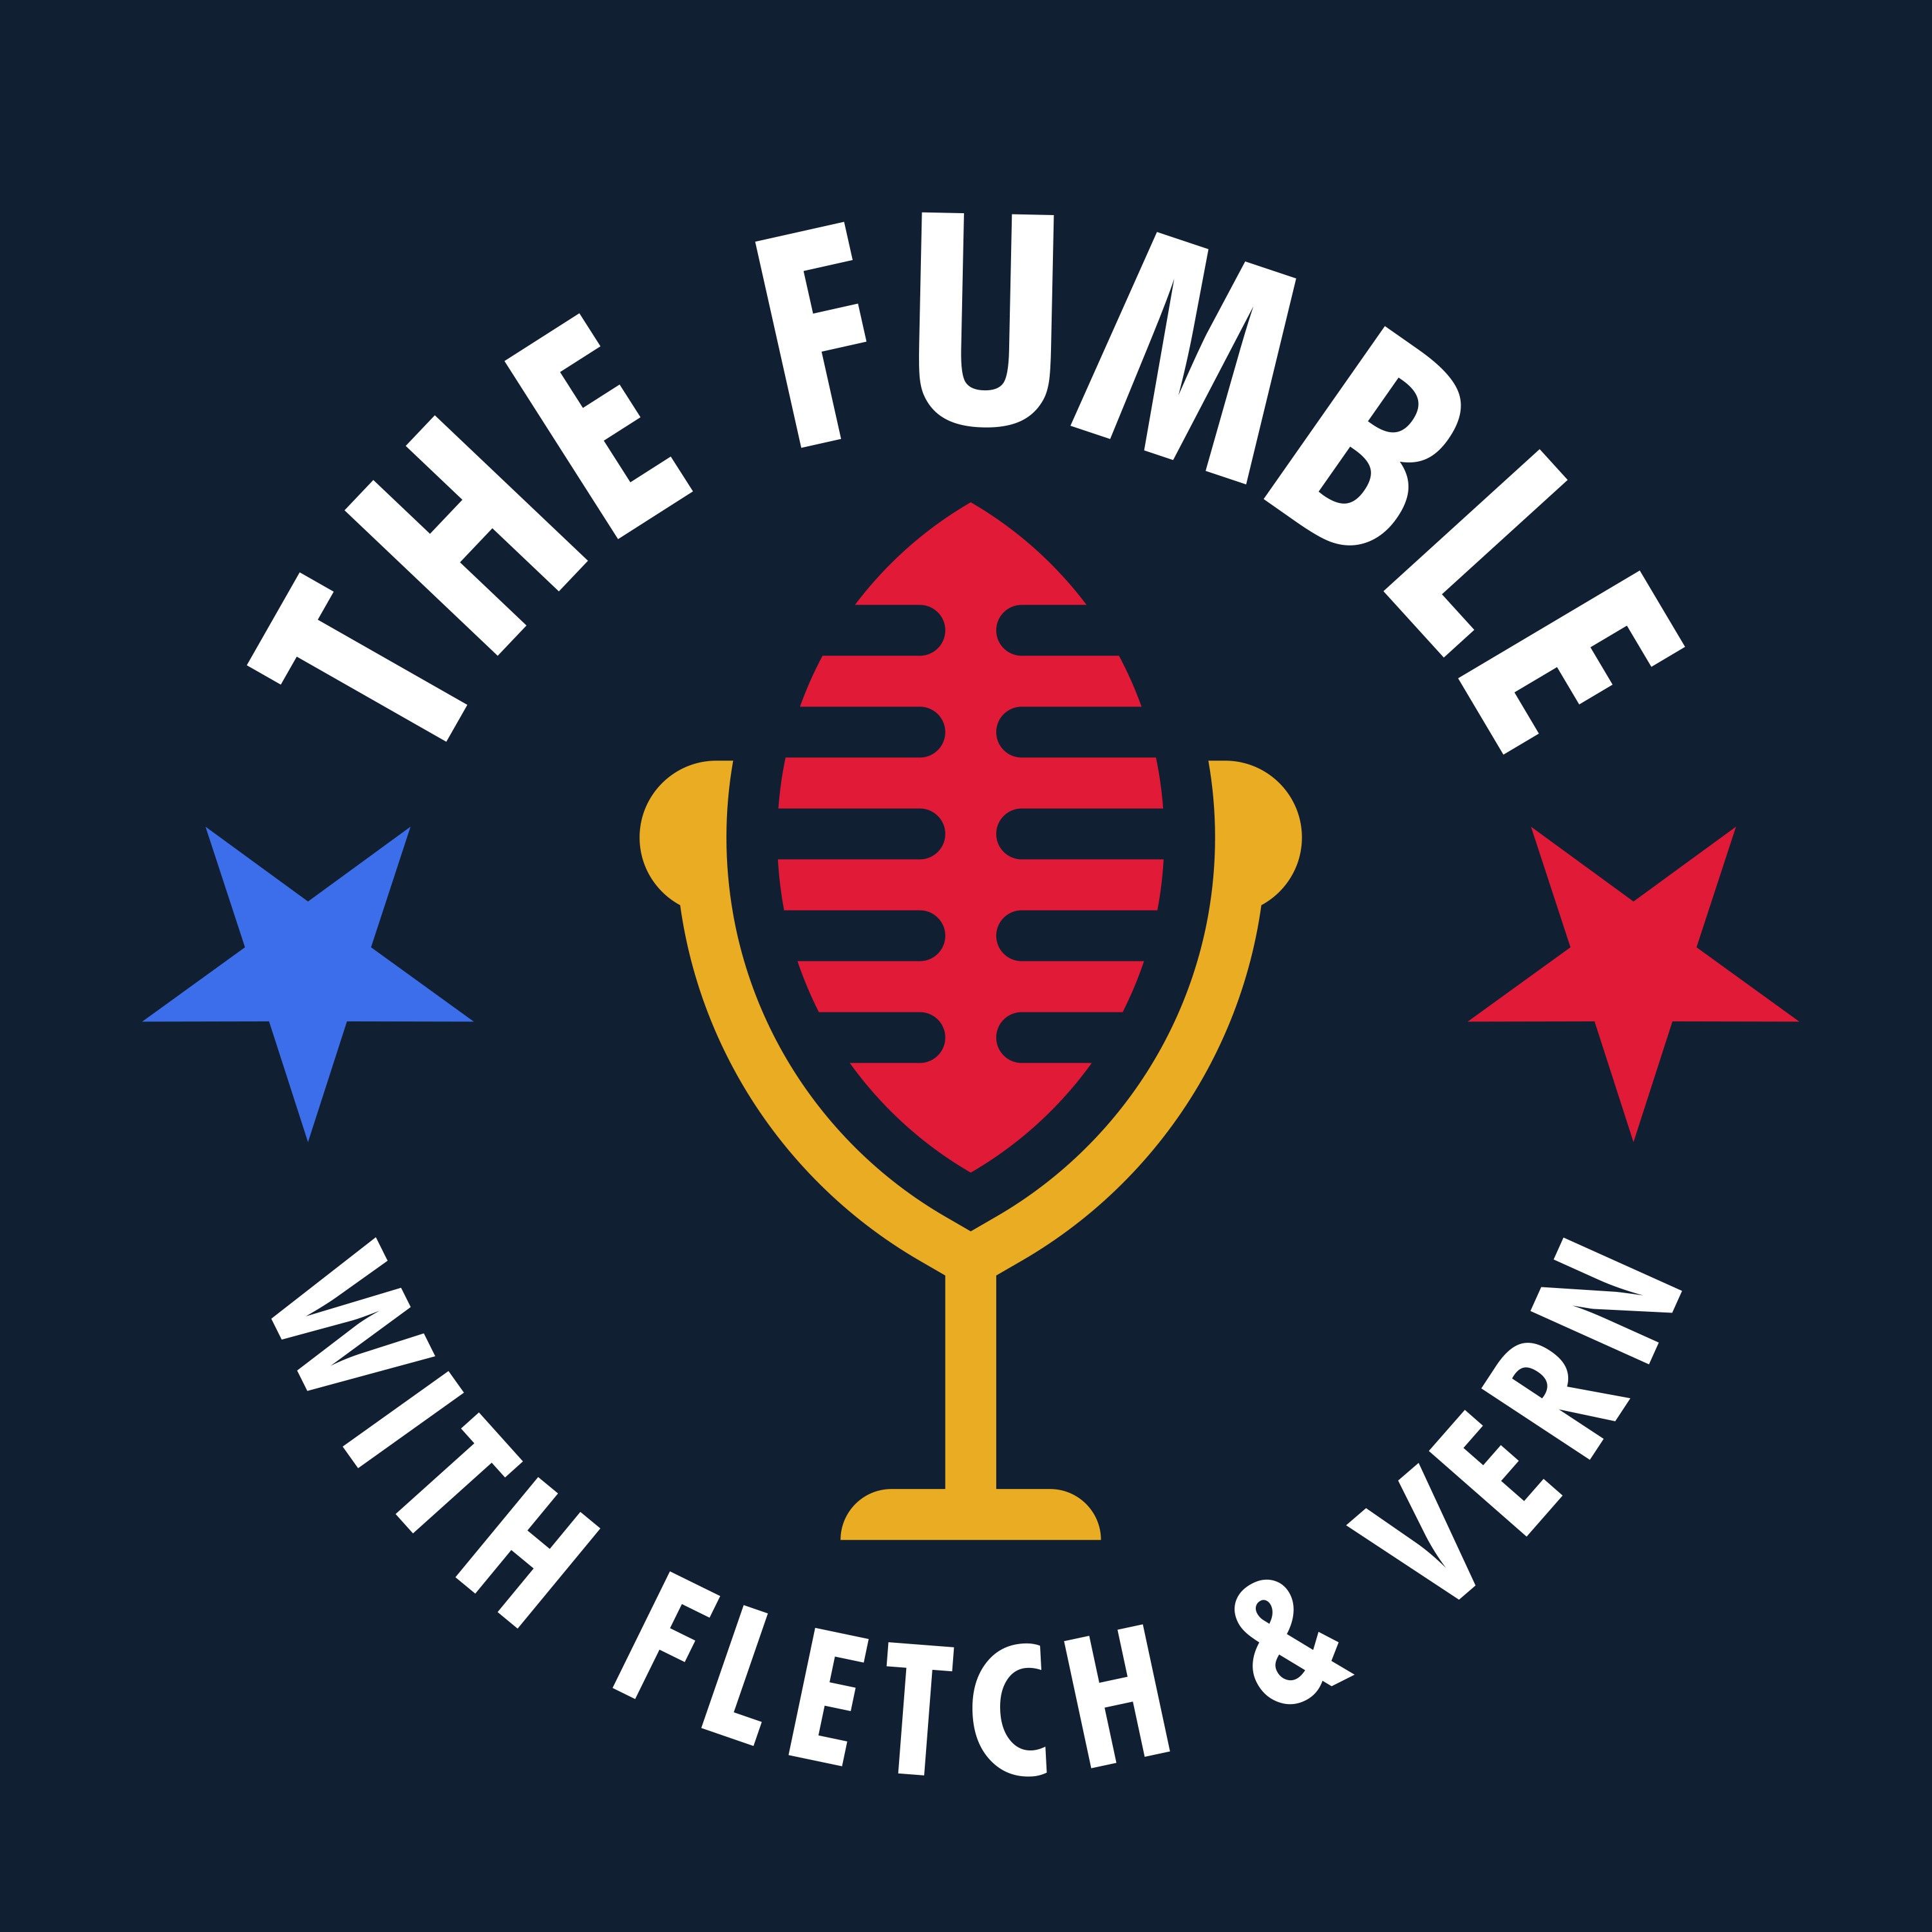 THE FUMBLE with FLETCH & VERN & NEIL & WILL S3E5 AT THE RAIDERS HOTEL